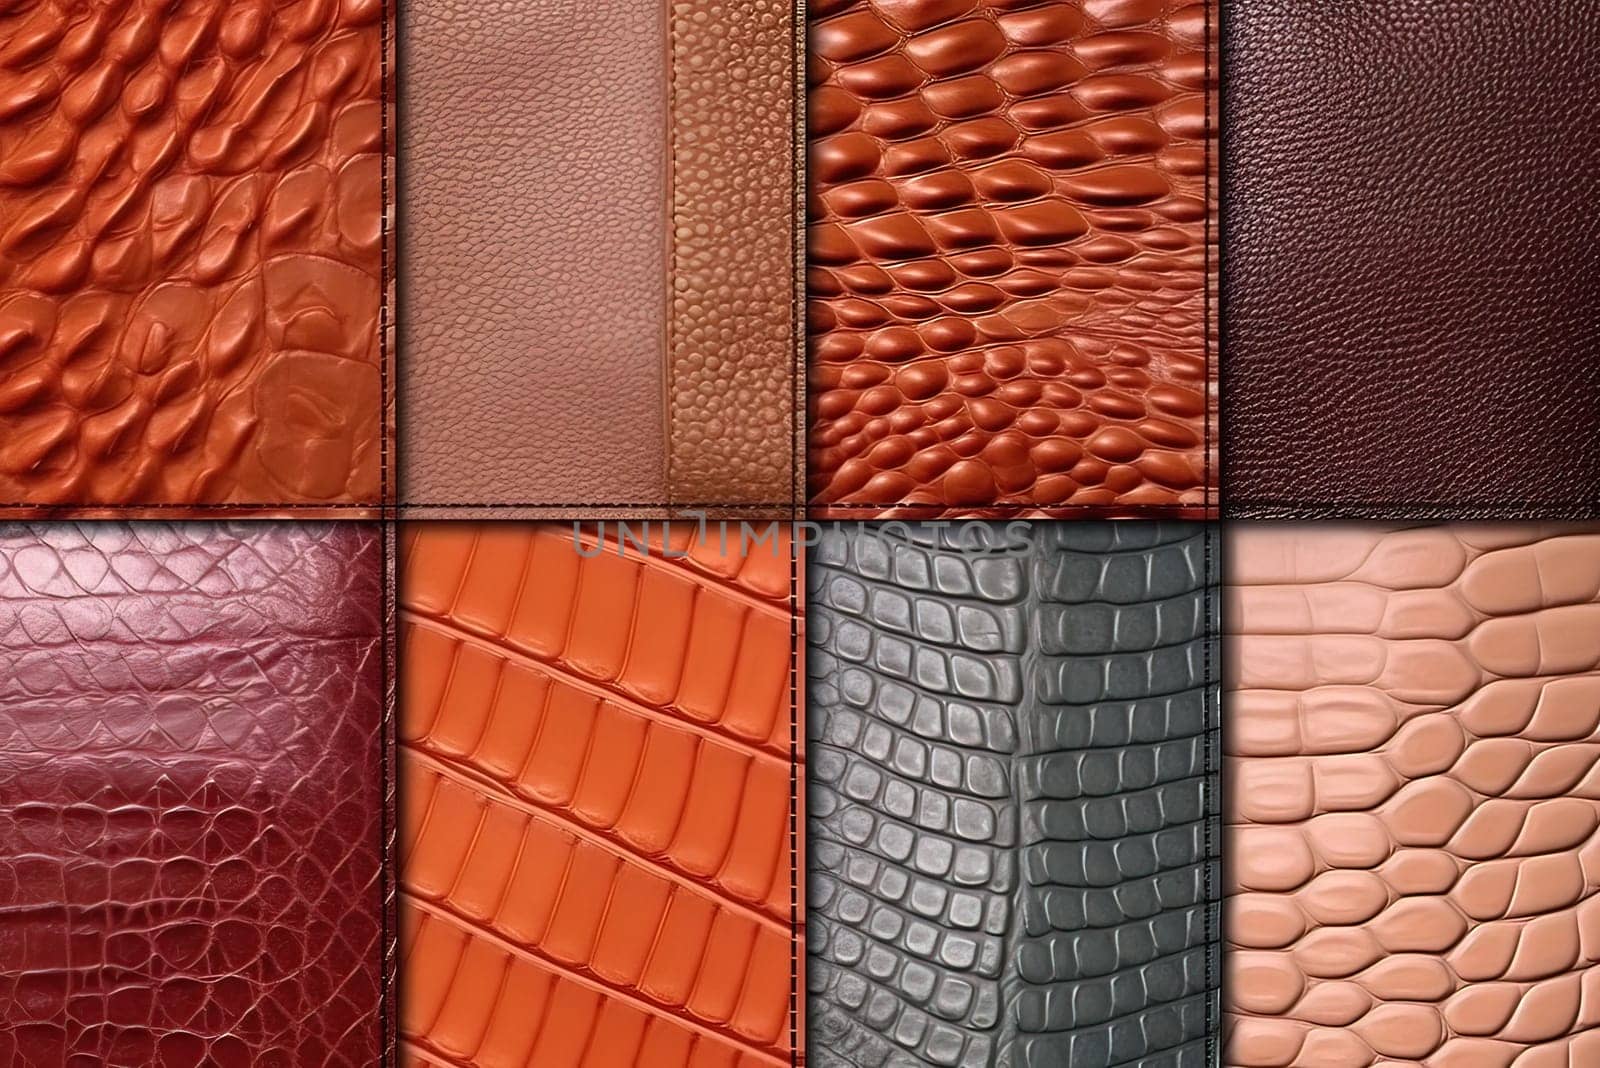 Examples of leather textures for sewing bags. Generative Artificial Intelligence by Yurich32